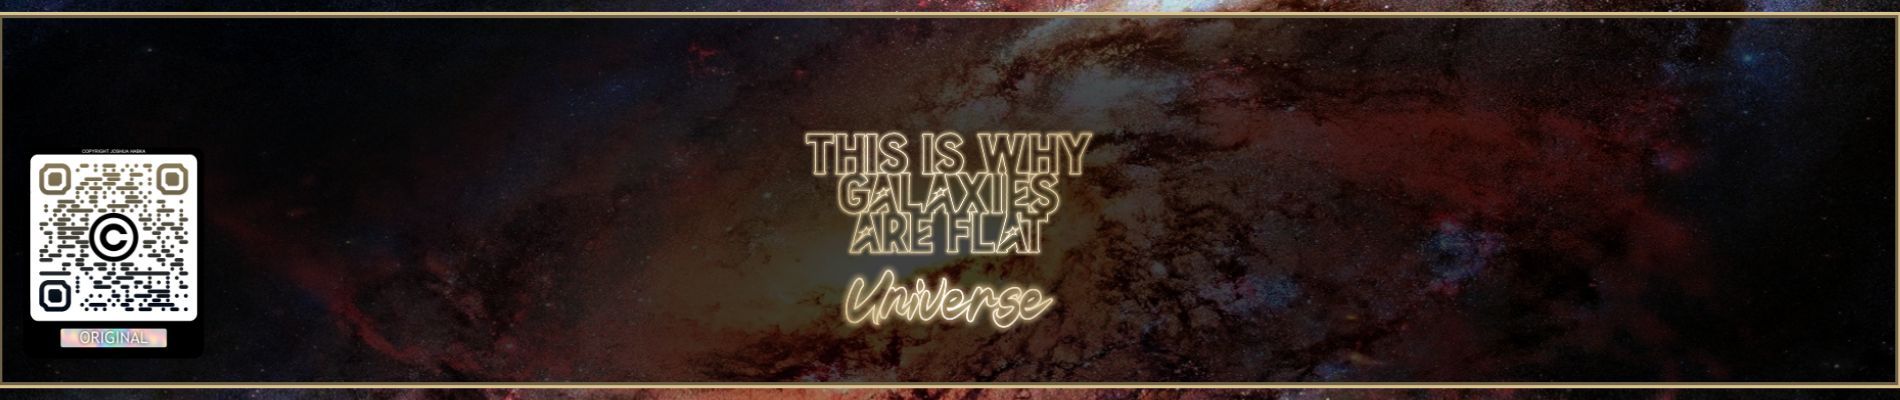 Why Are Galaxies Flat?